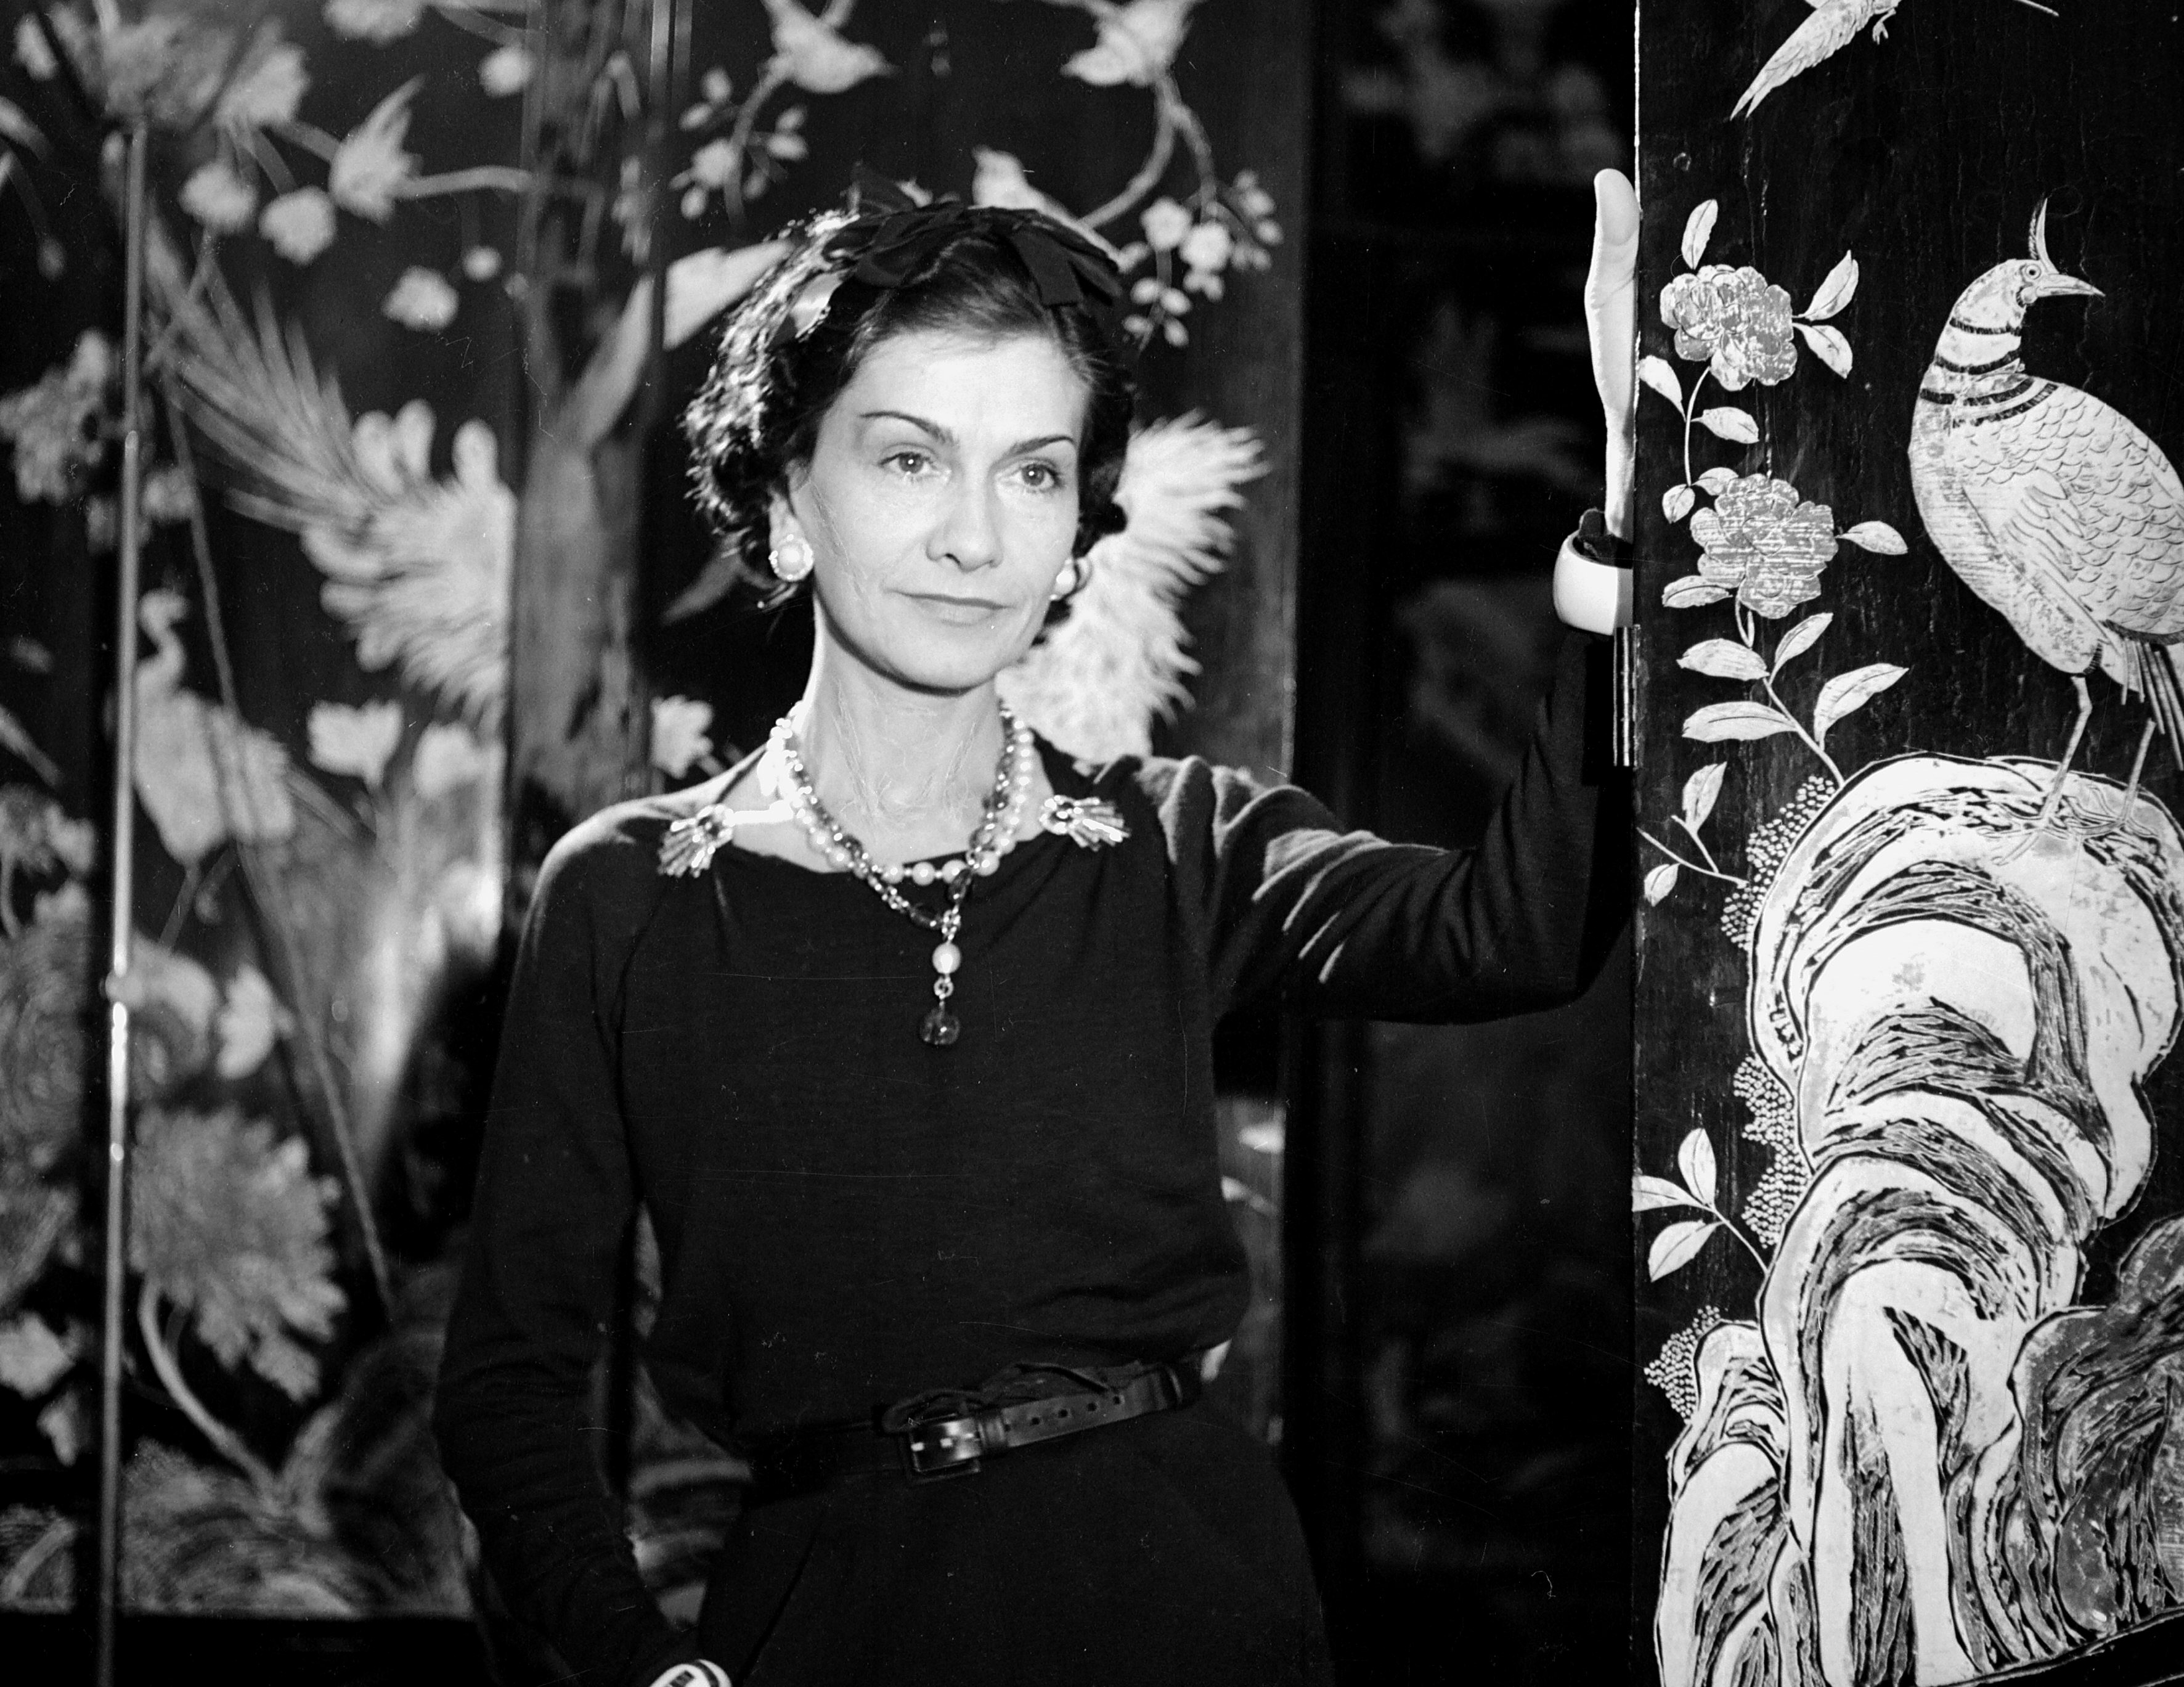 Talk About Iconic: How to Channel Your Inner Coco Chanel